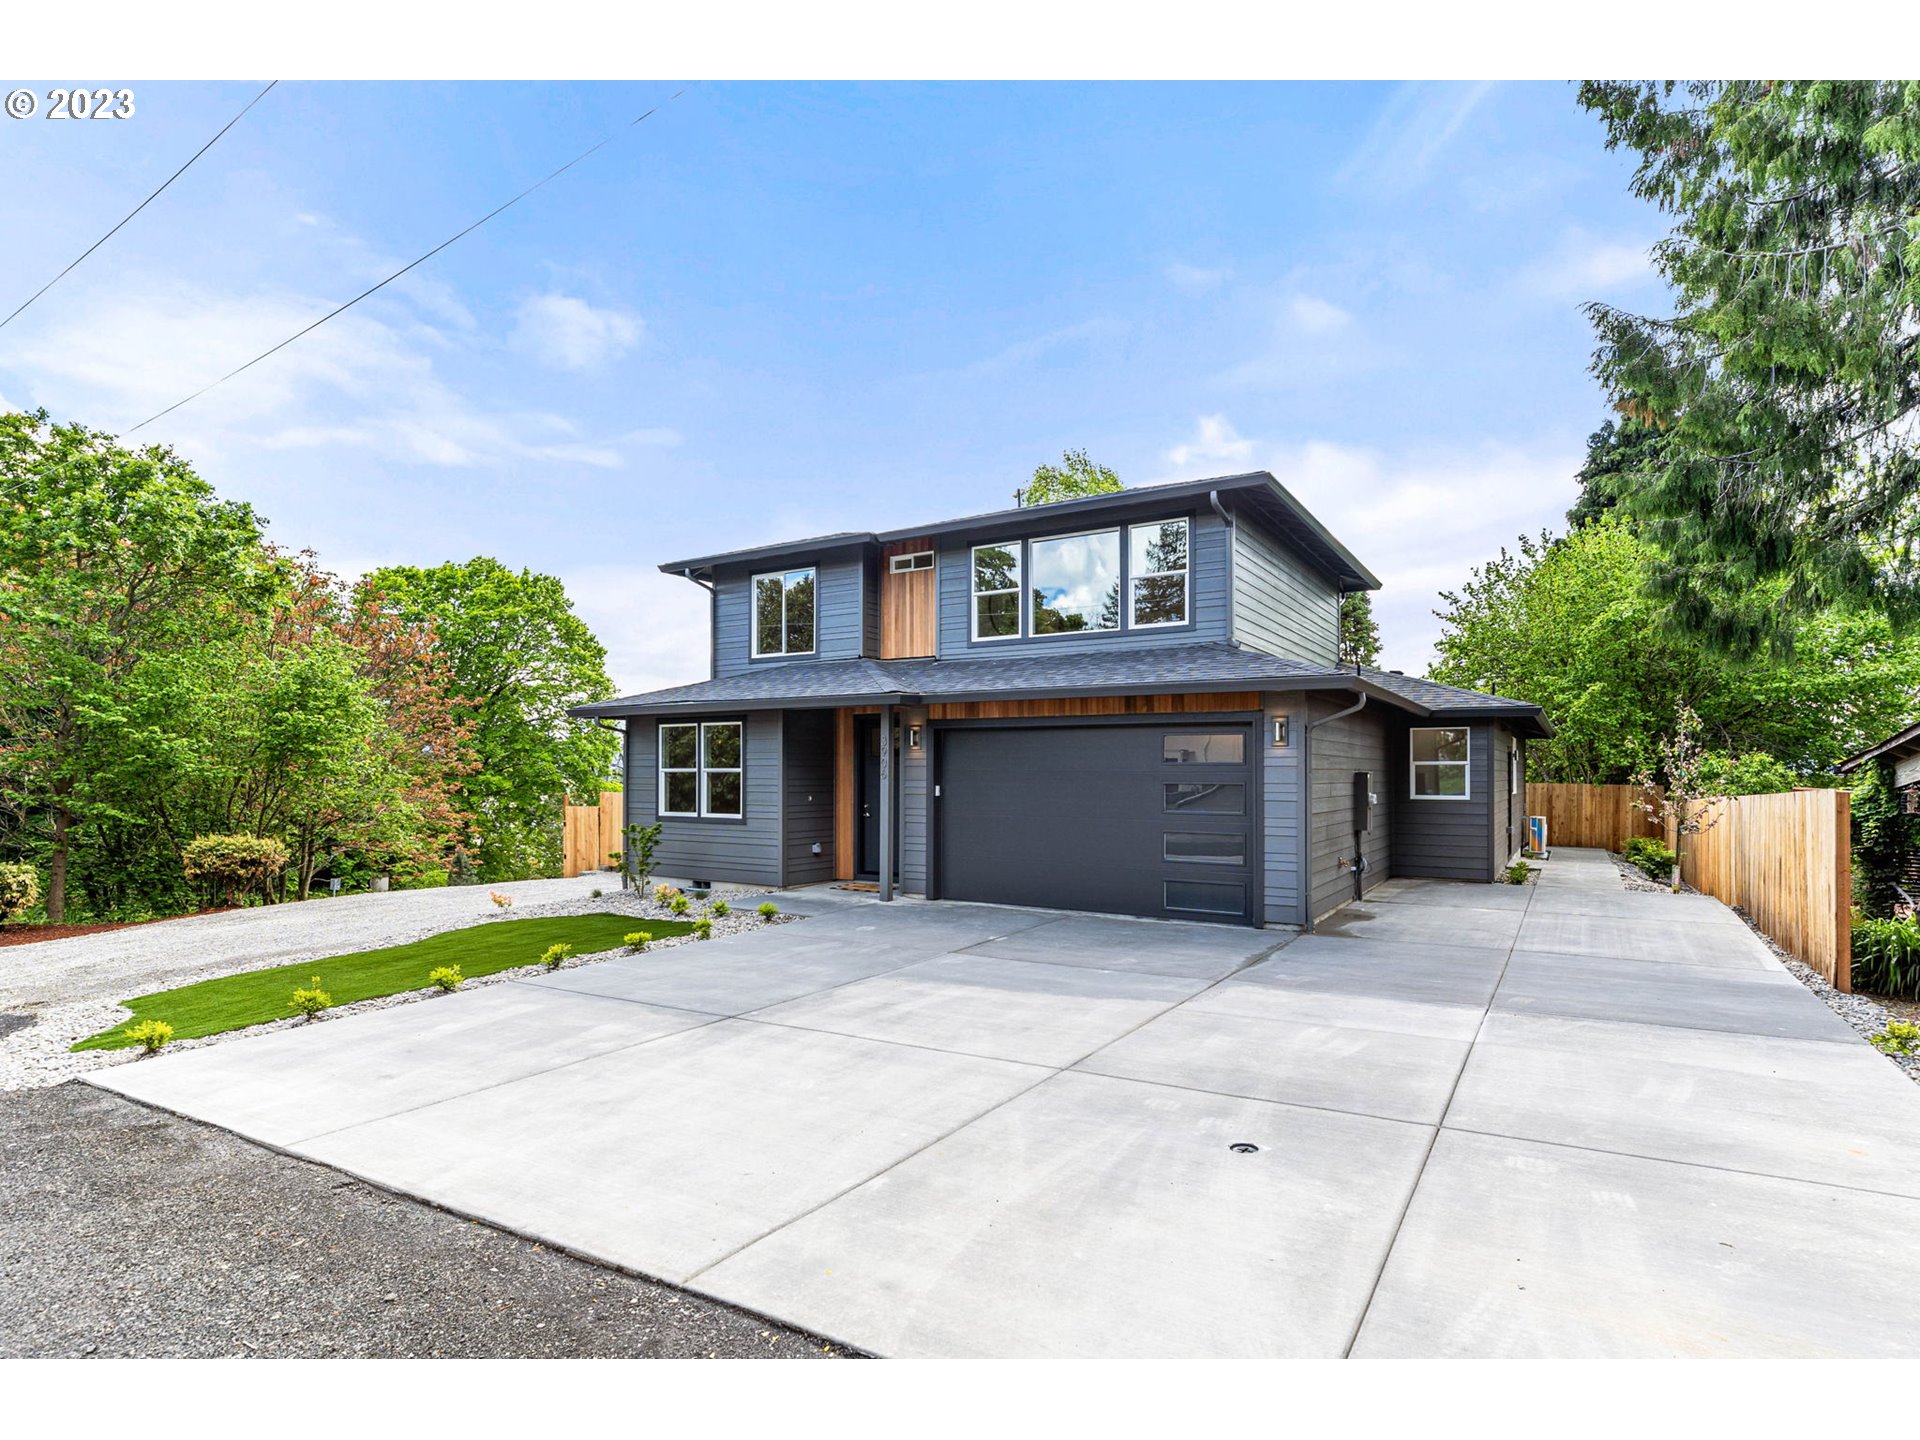 3906 NW Rose St, Vancouver, WA 98660